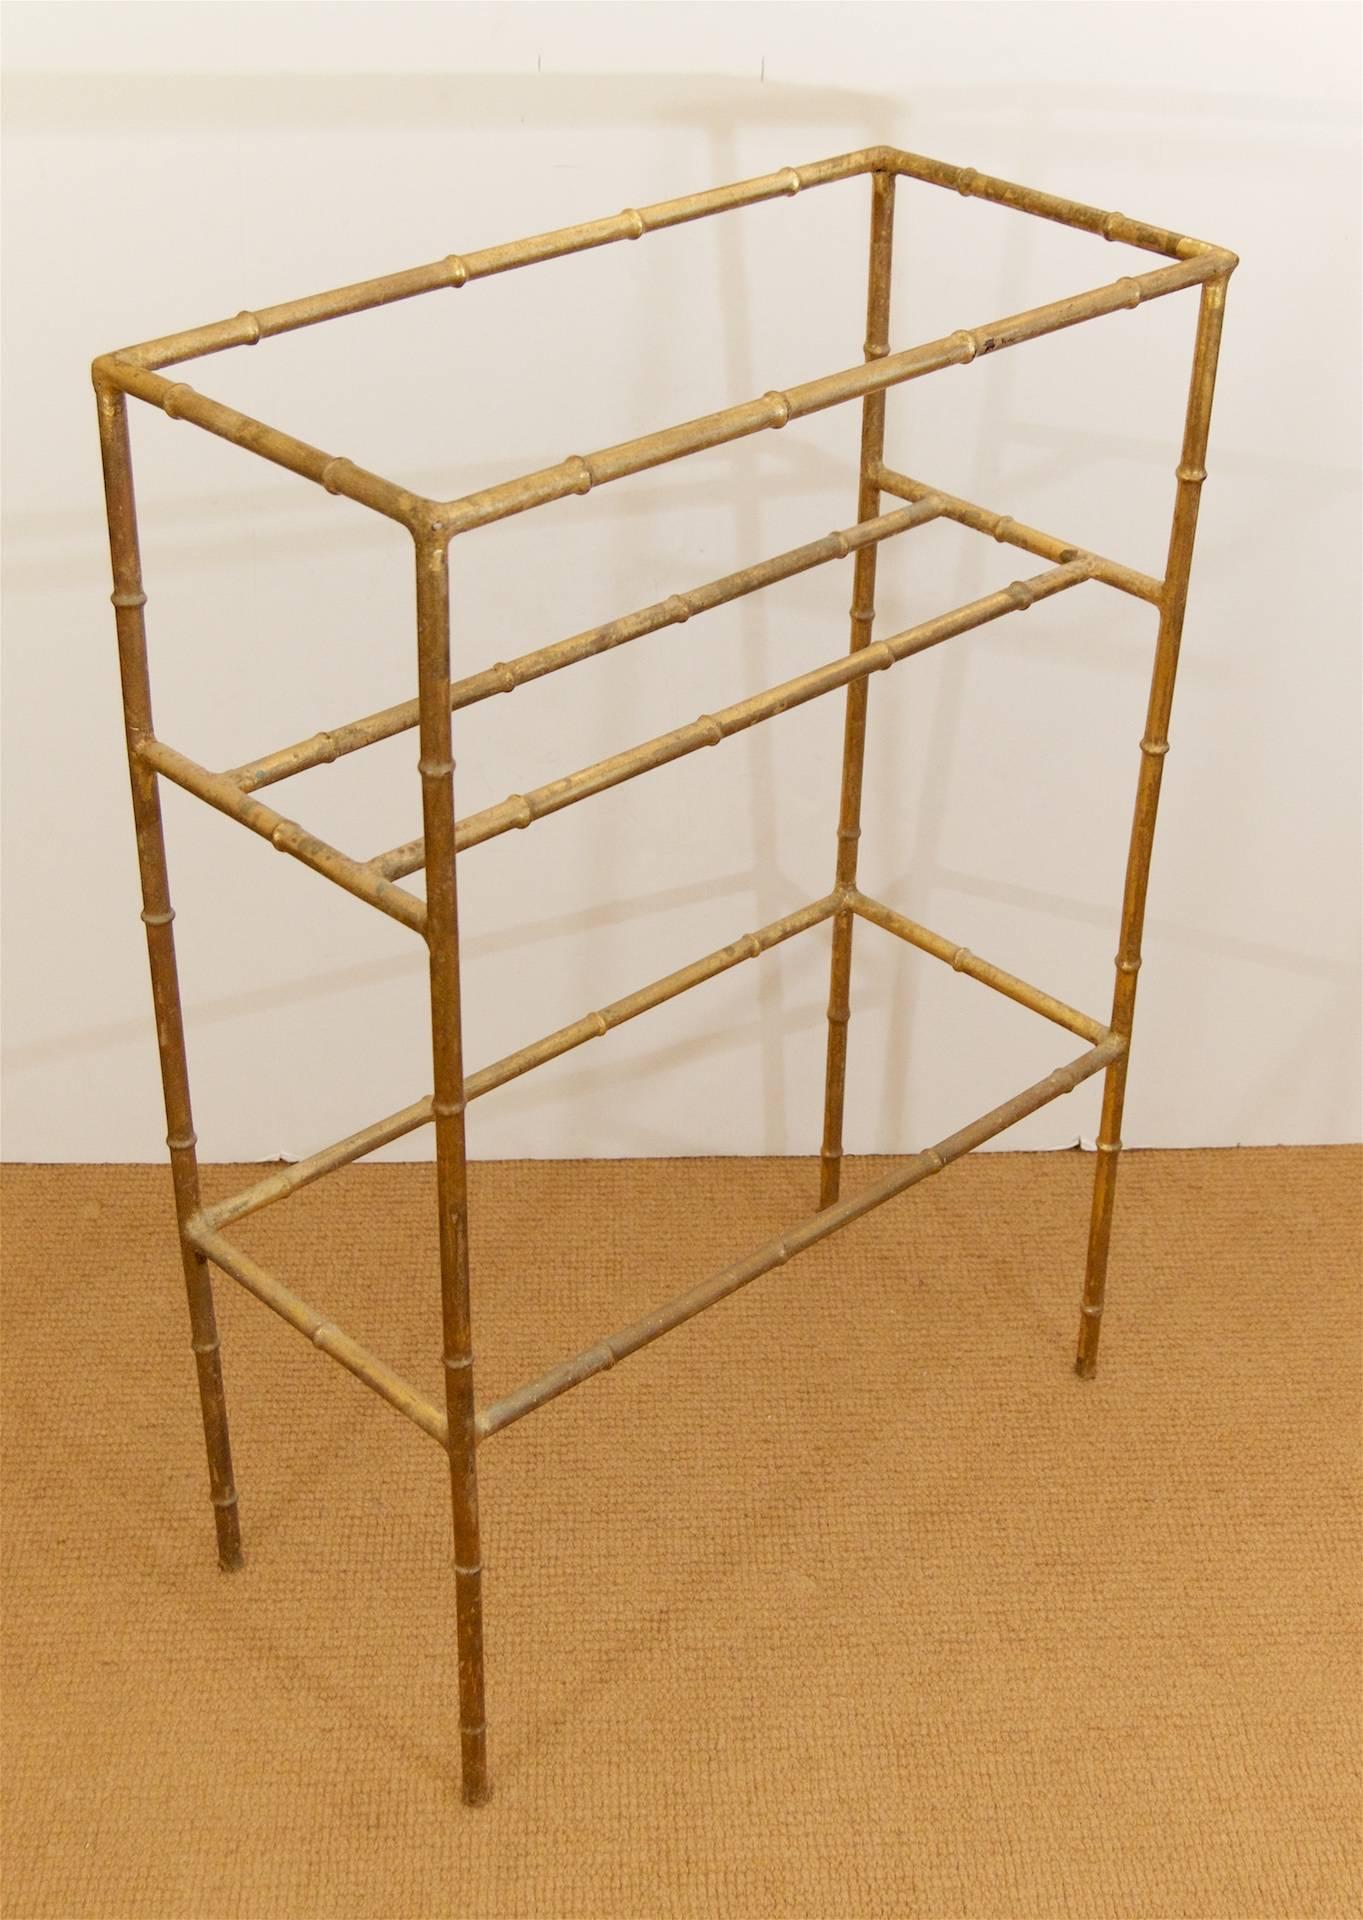 Well sized faux bamboo gilt metal towel rack. Perfect for narrow spaces.